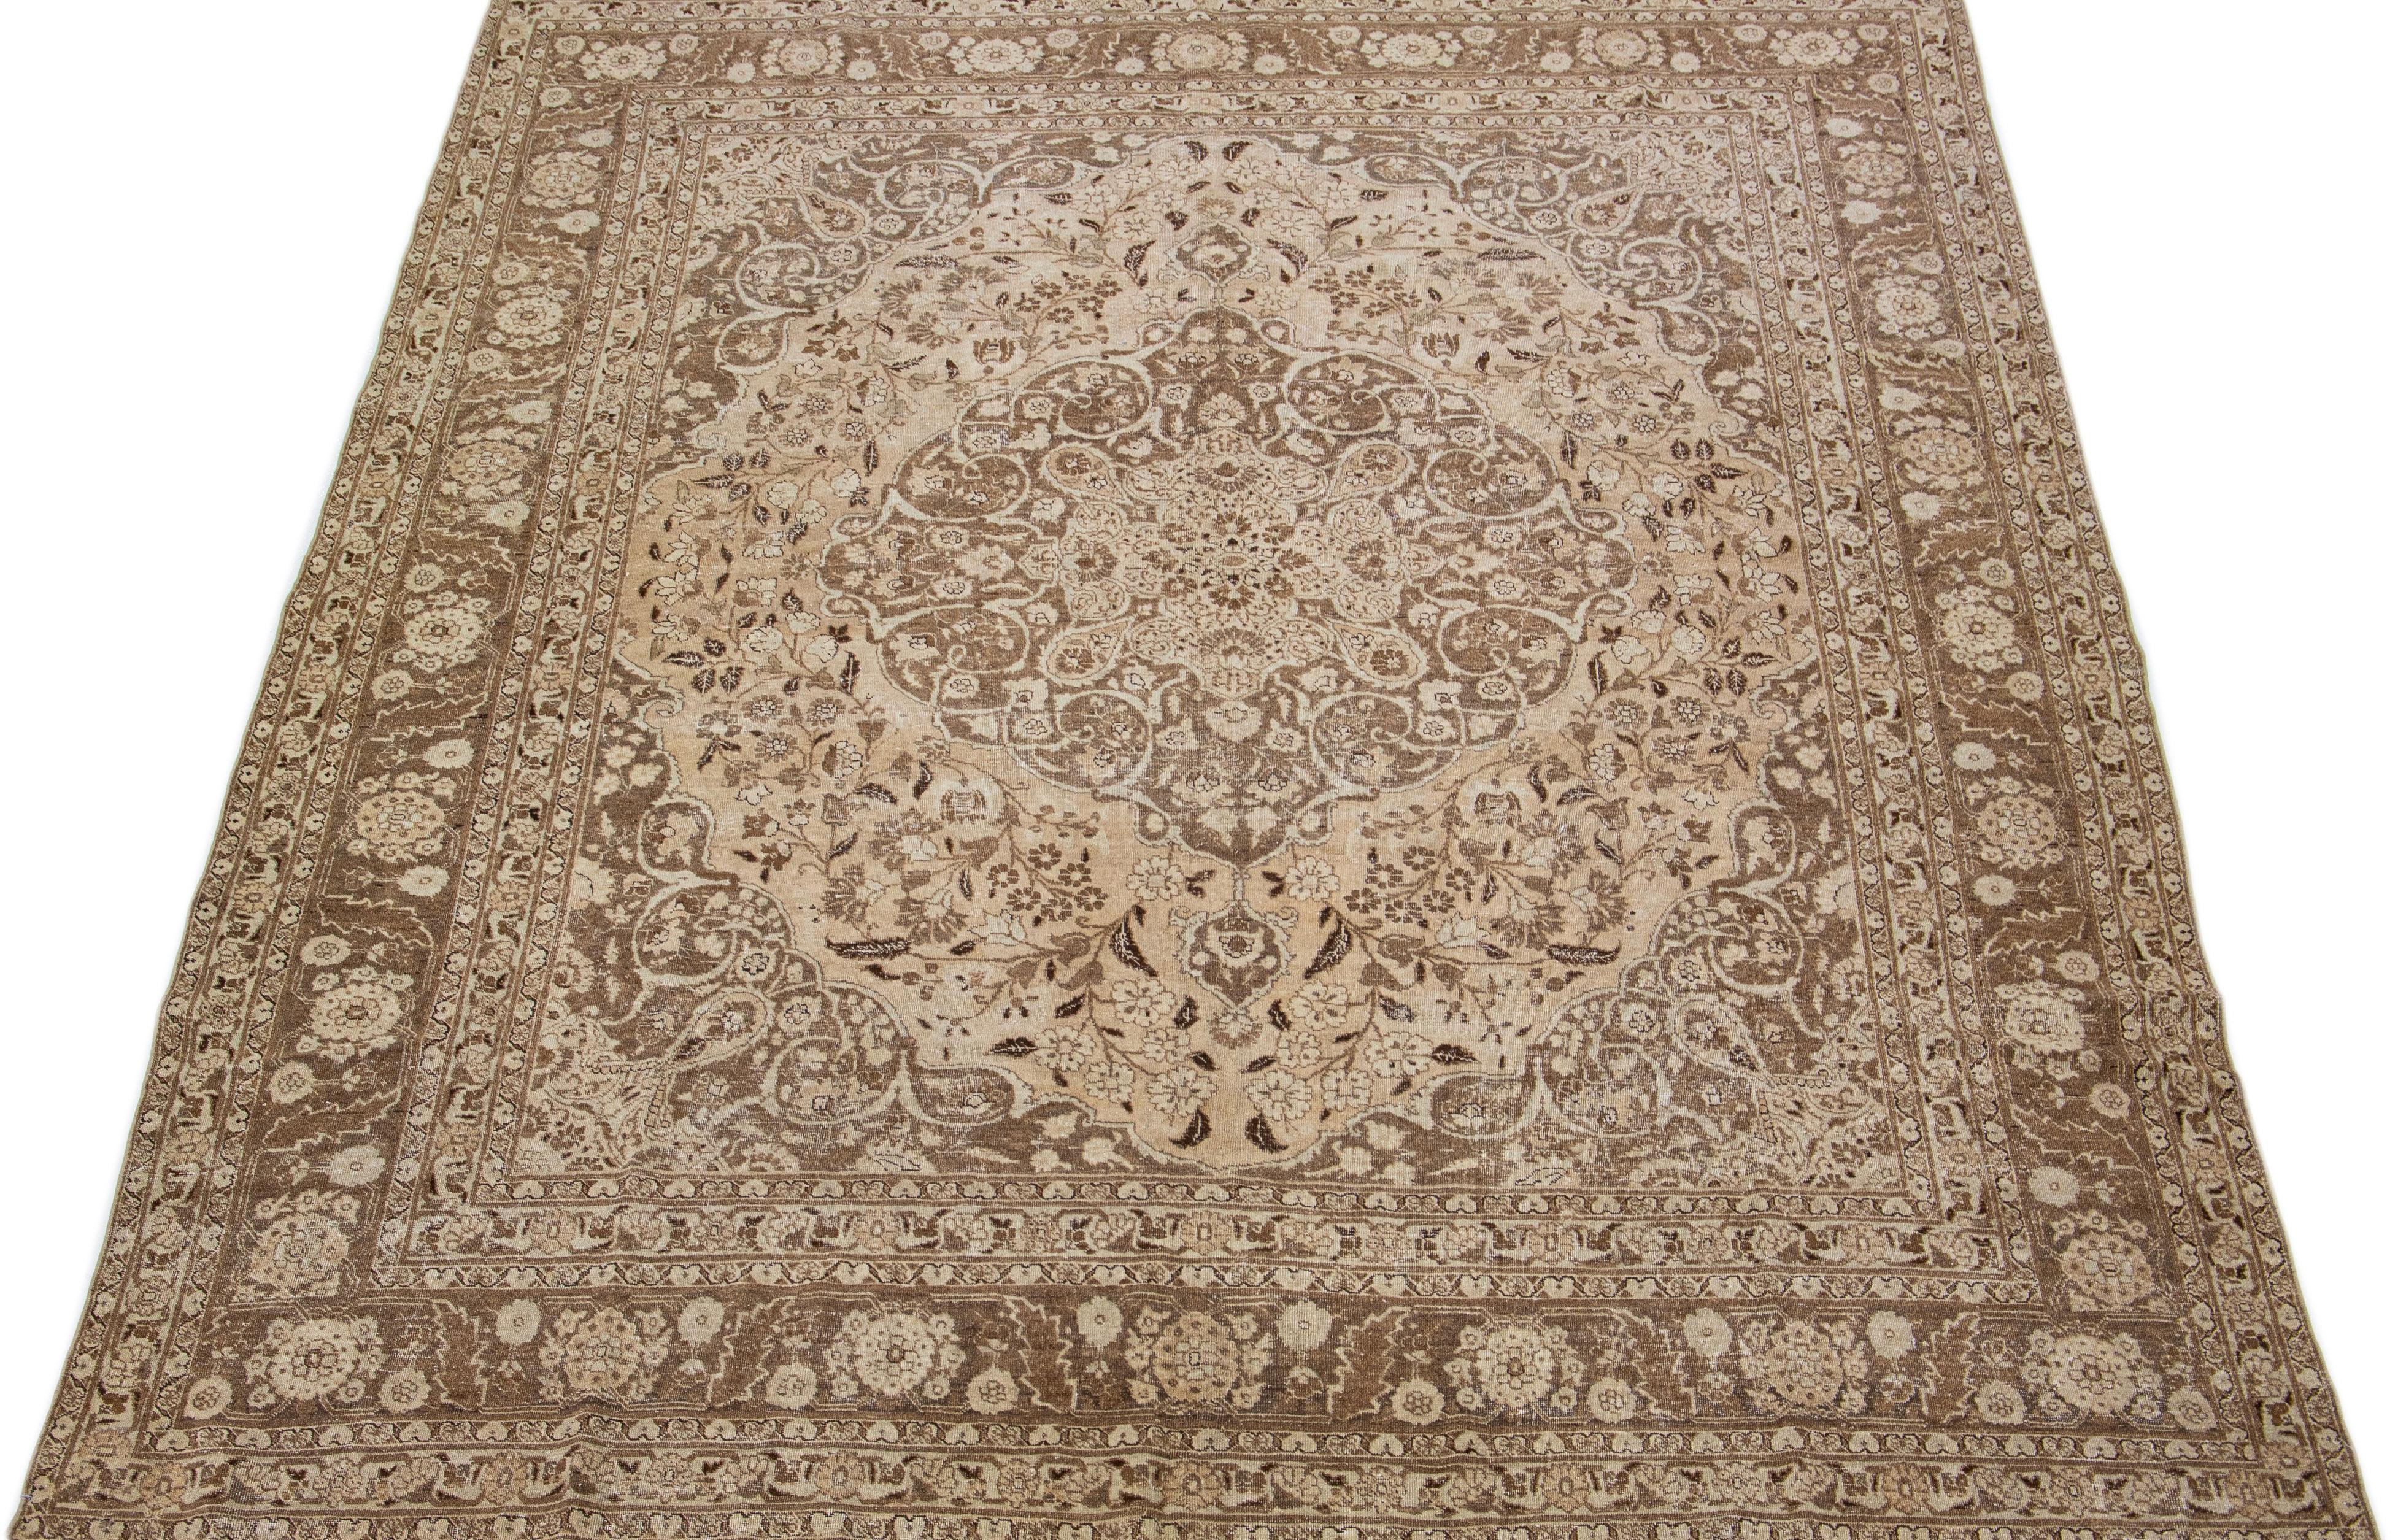 Brown 1920s Antique Persian Tabriz Handmade Wool Rug with Medallion Design For Sale 1